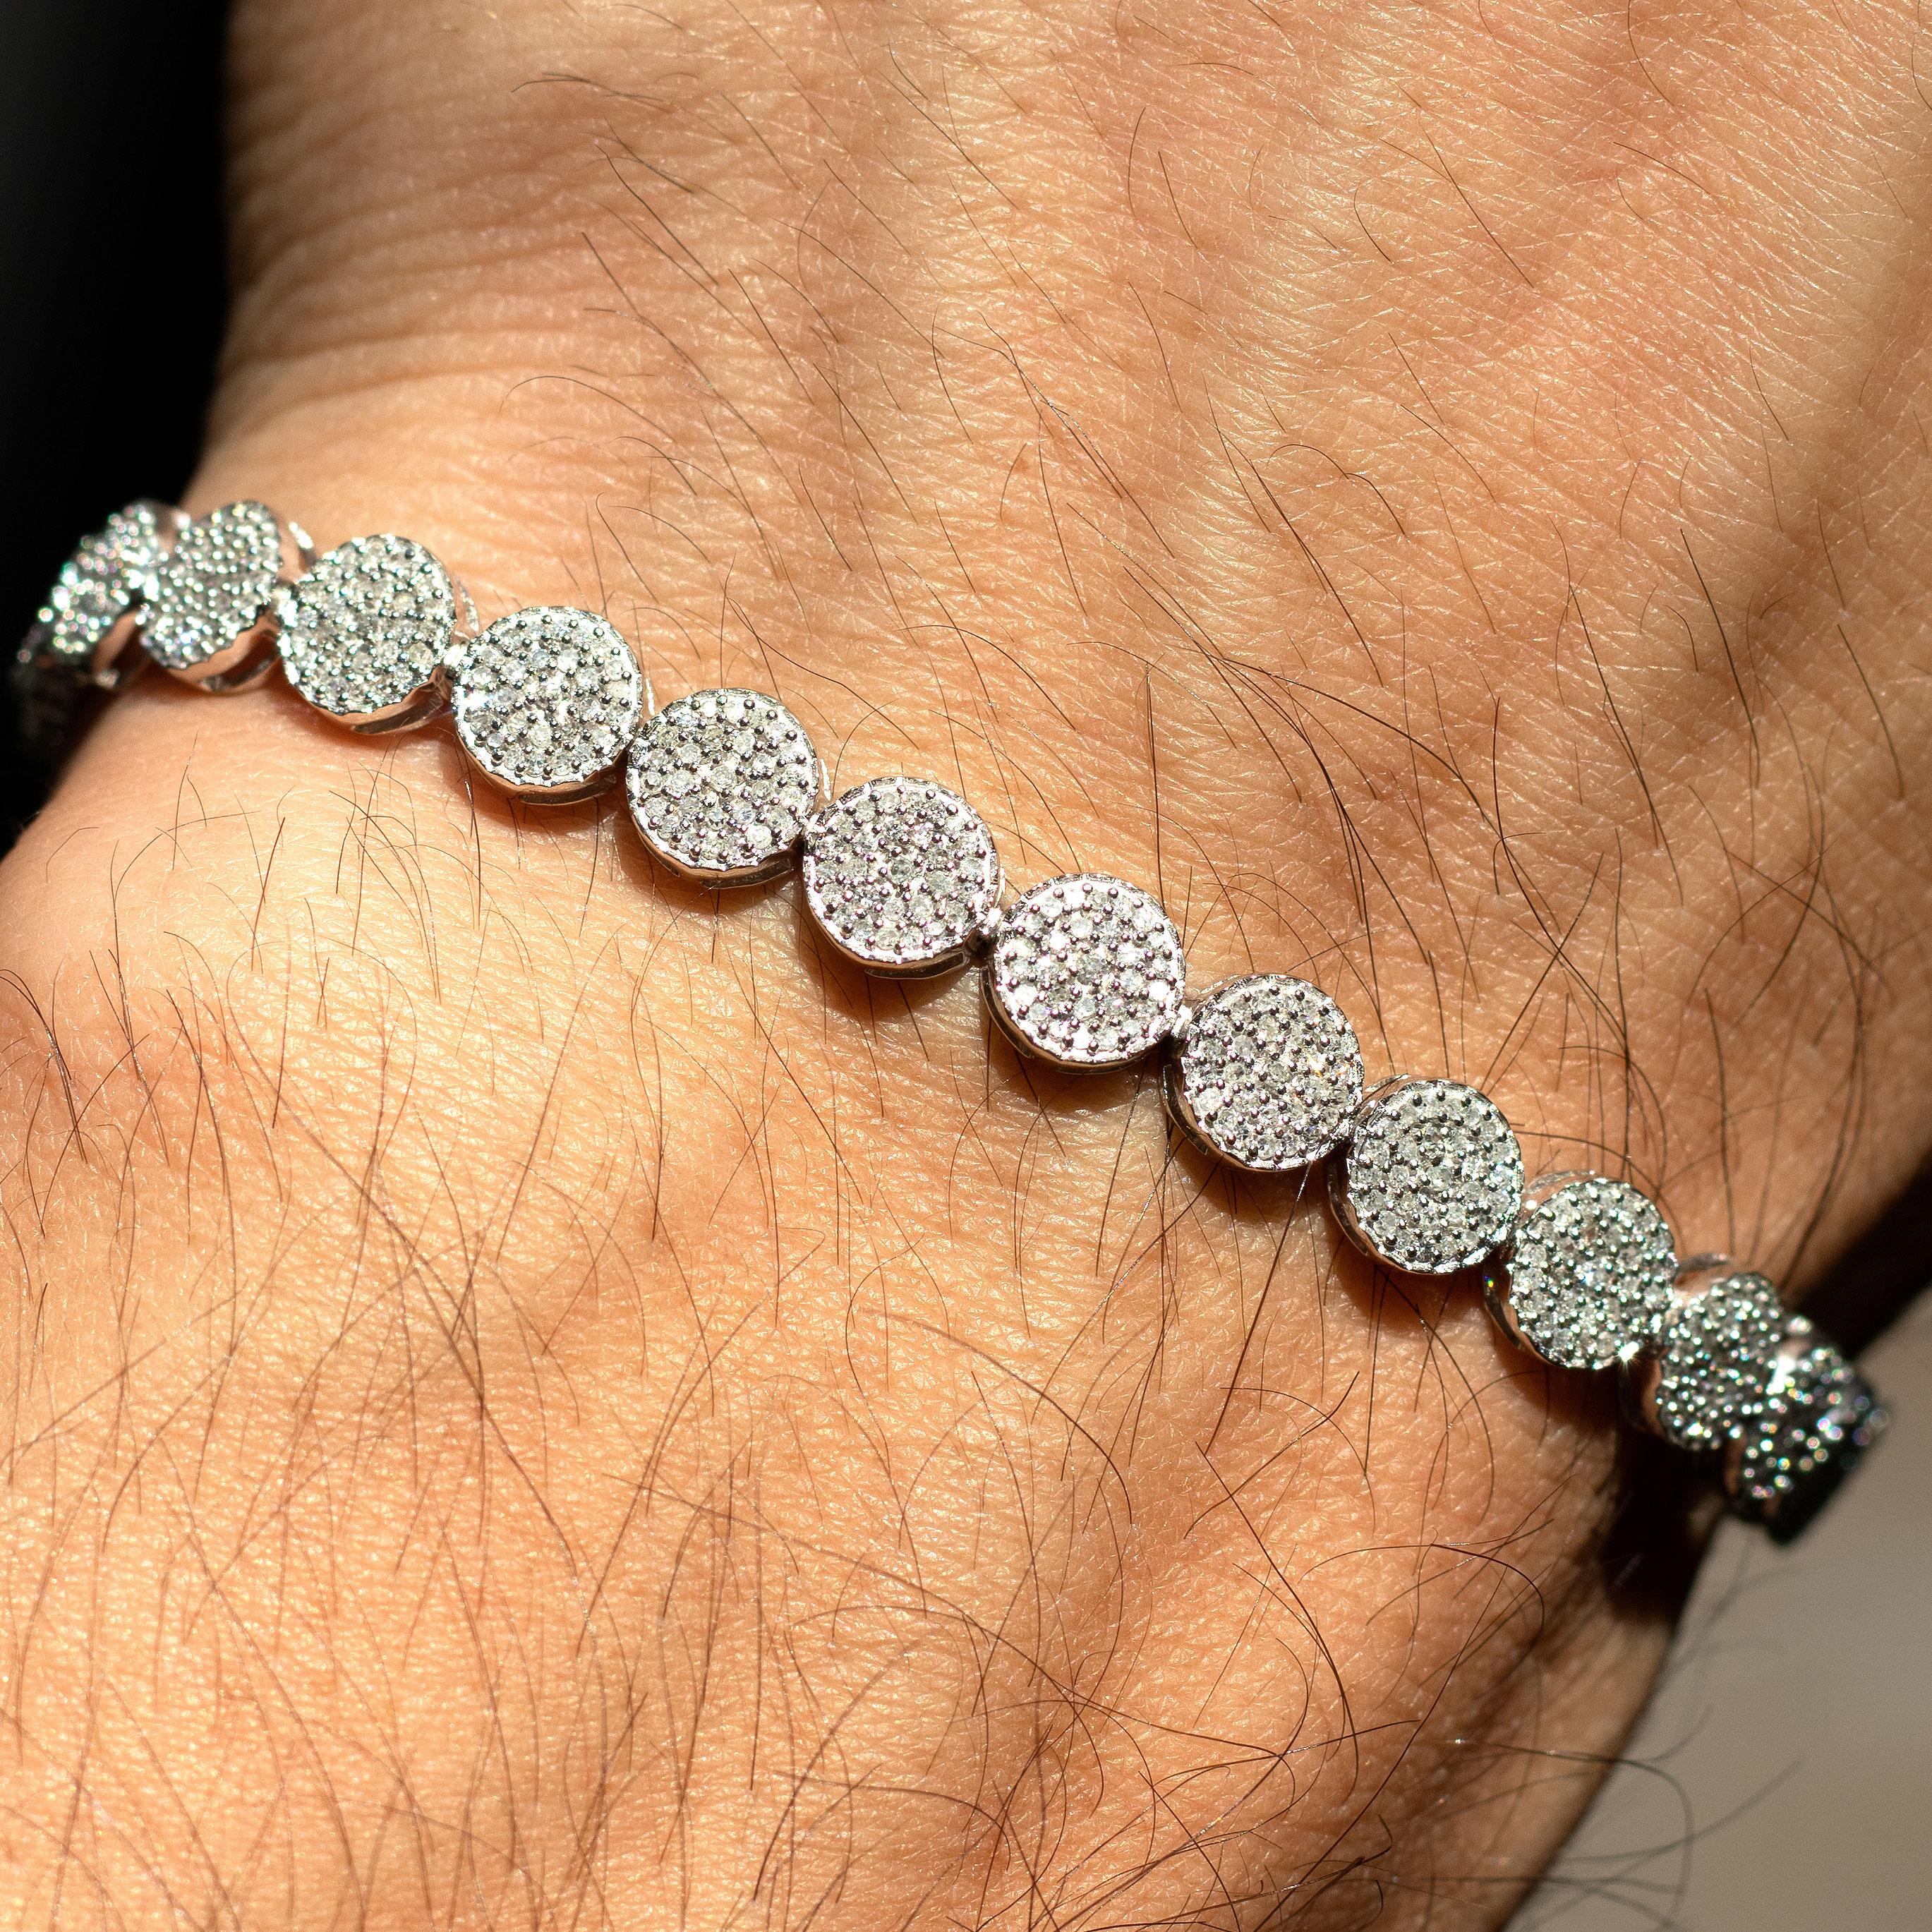 14k White Gold 7ctw Round Diamond Pave 8 inch Bracelet

Elevate your elegance with this stunning 14k White Gold Round Diamond Pave Bracelet. Its breathtaking design features approximately 7 carats of round-cut Diamonds, boasting a remarkable G/H